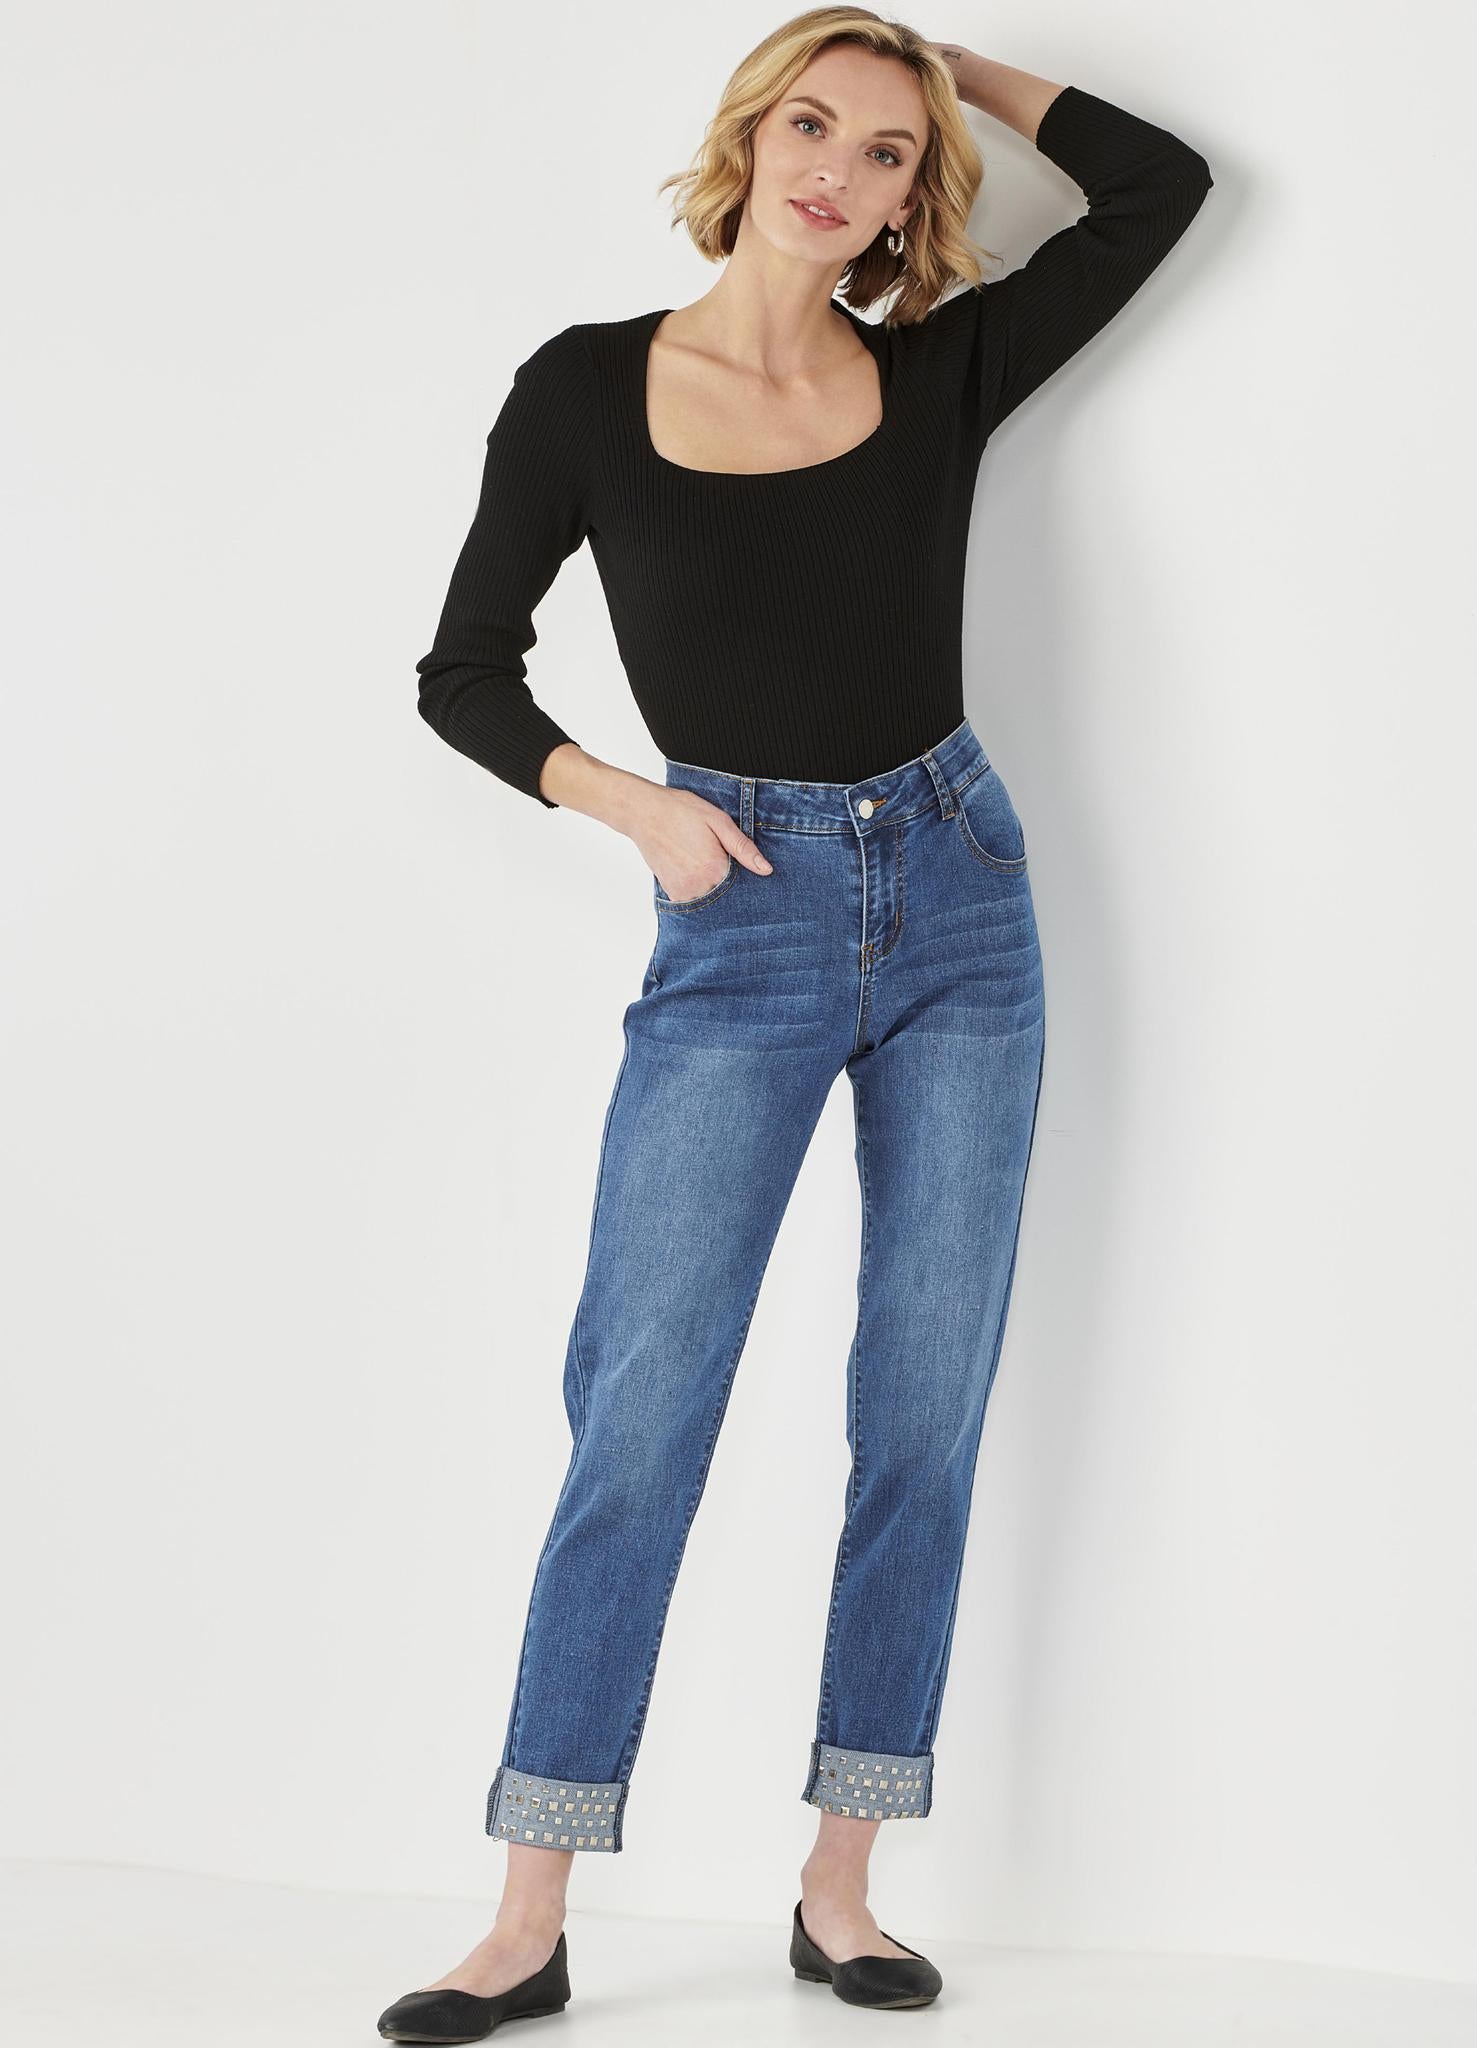 Charlie Paige Perfect Fit Jean | Silver Studs